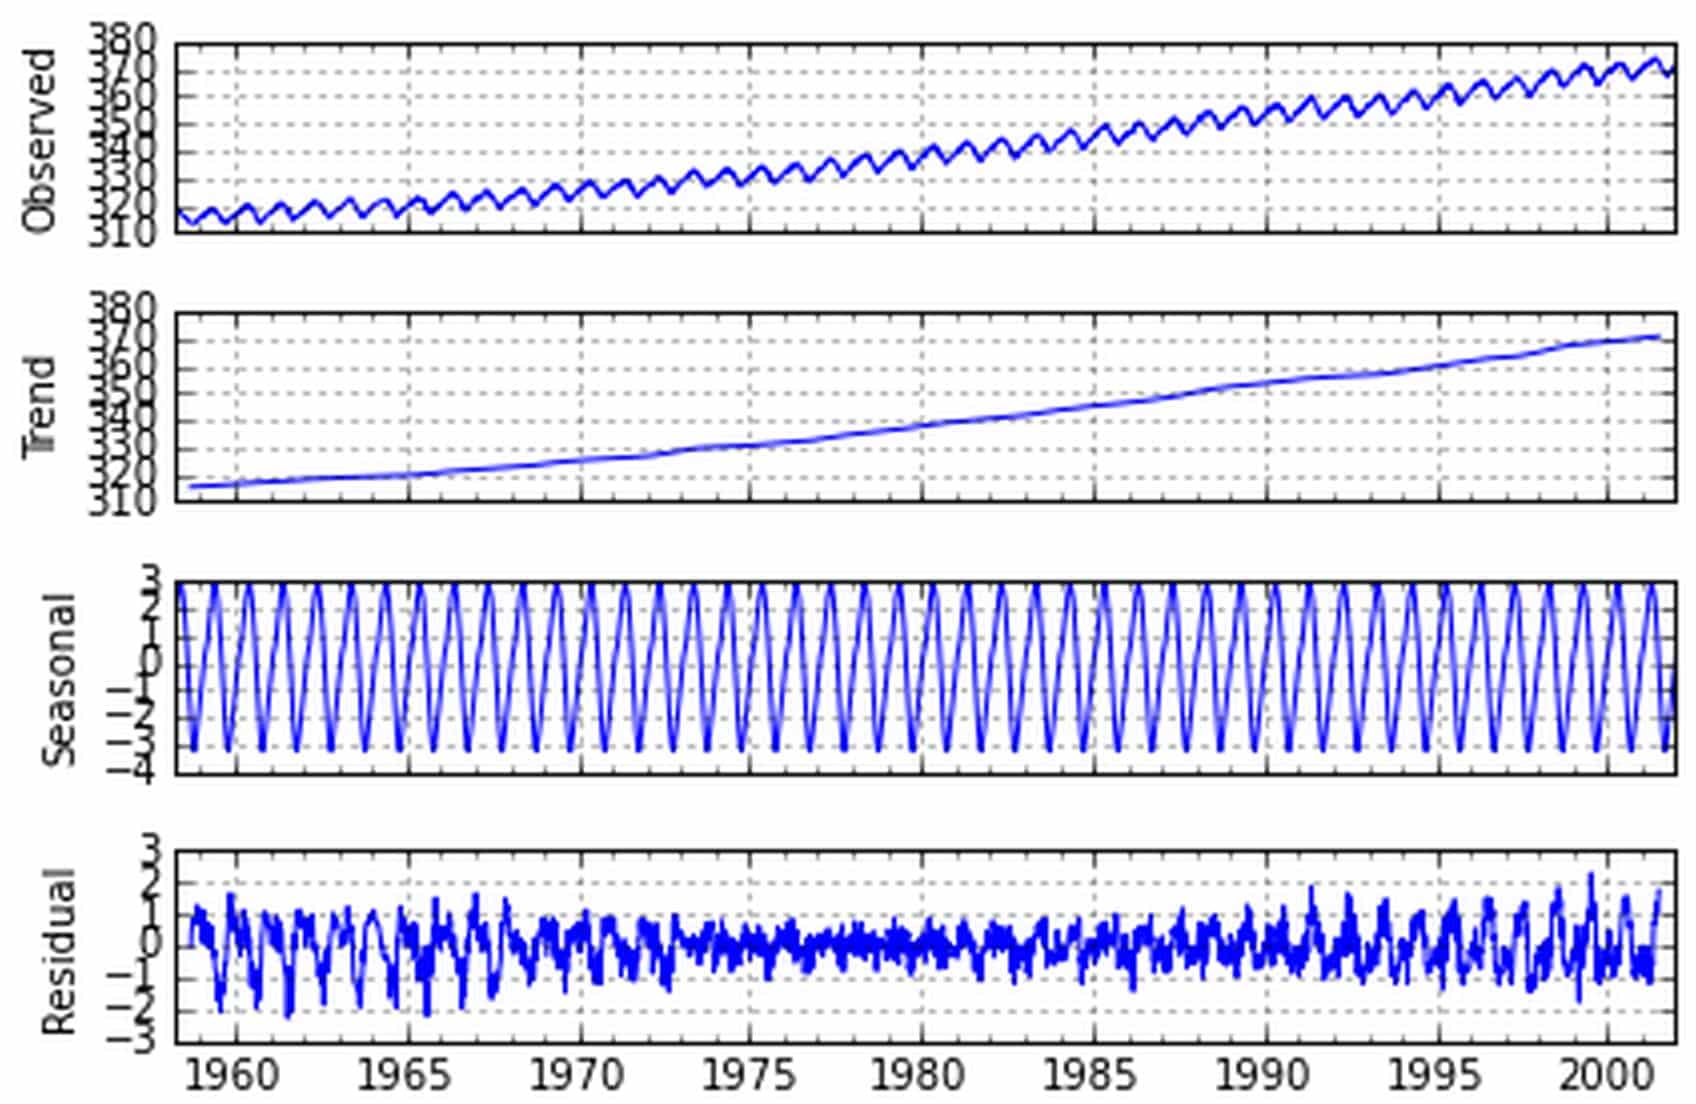 Seasonal Decomposition of a Time Series (STL)